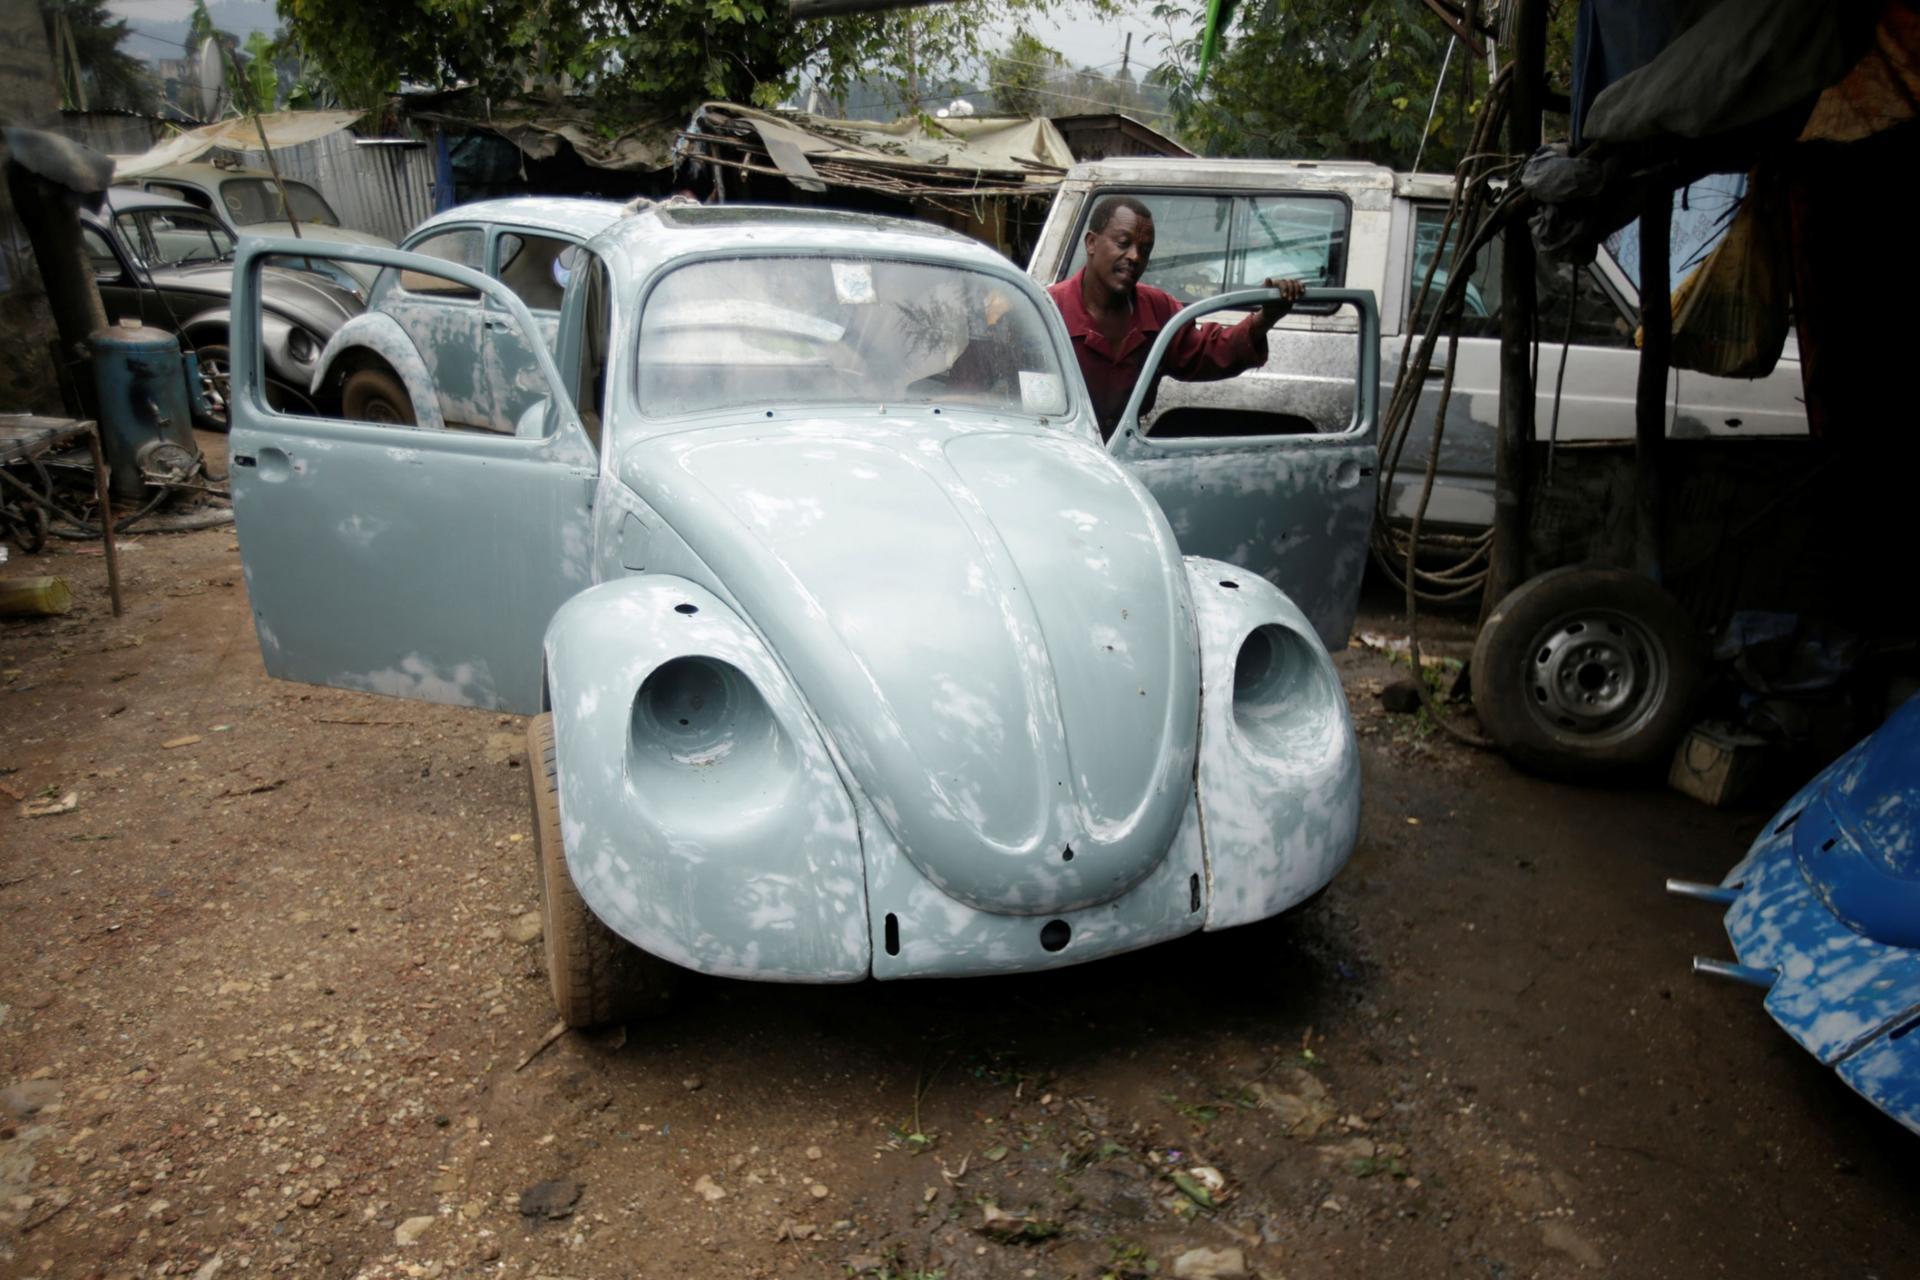 A man is shown behind an open door of a Volkswagen Beetle while he is pushing it.